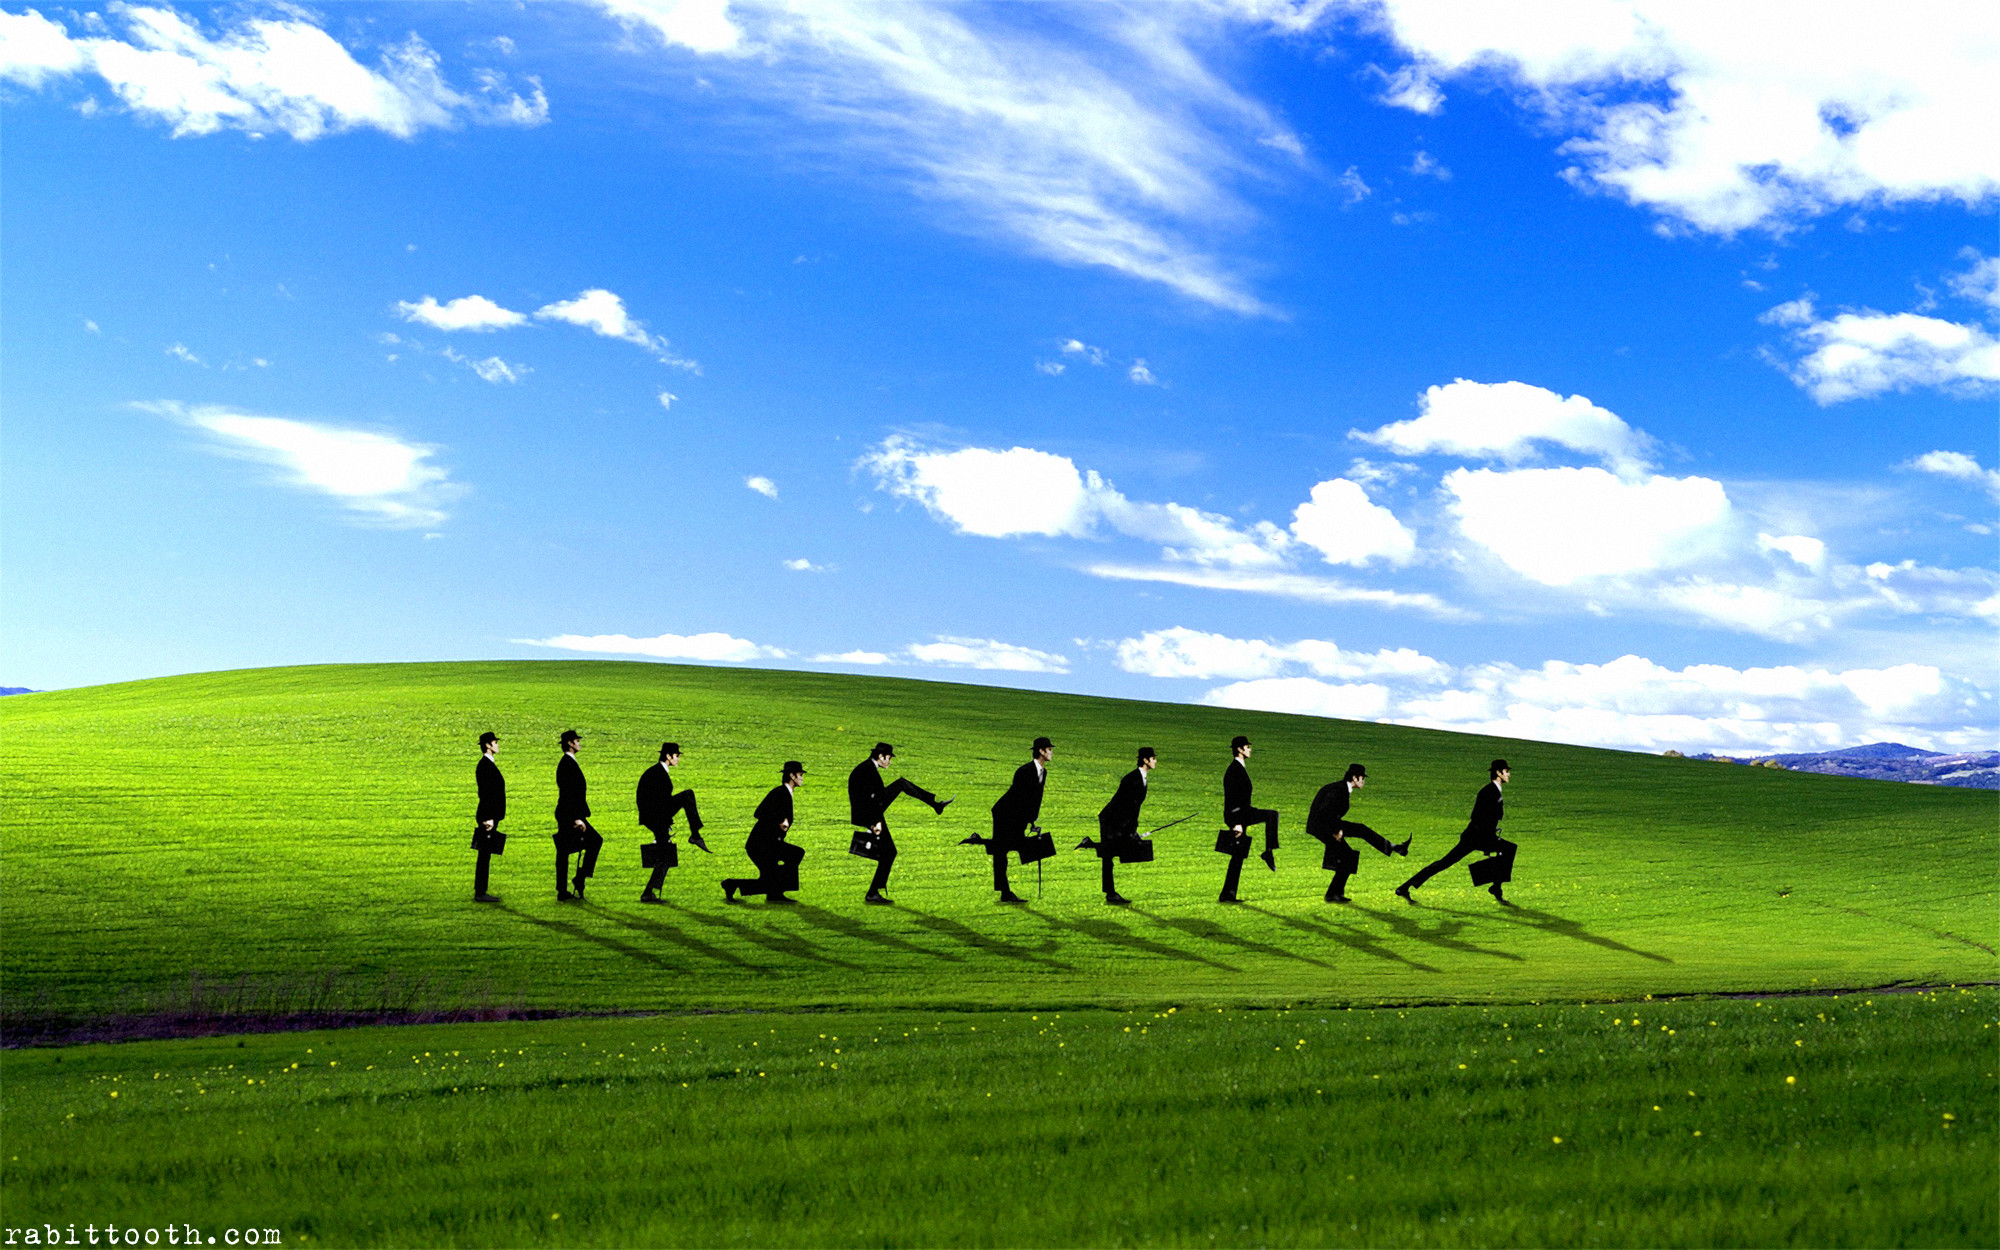 2000x1250 World's Most-Viewed Photo – The Windows XP 'Bliss' Wallpaper. Given that at  least 500 million people still use the Windows XP operating system, it's no  sur